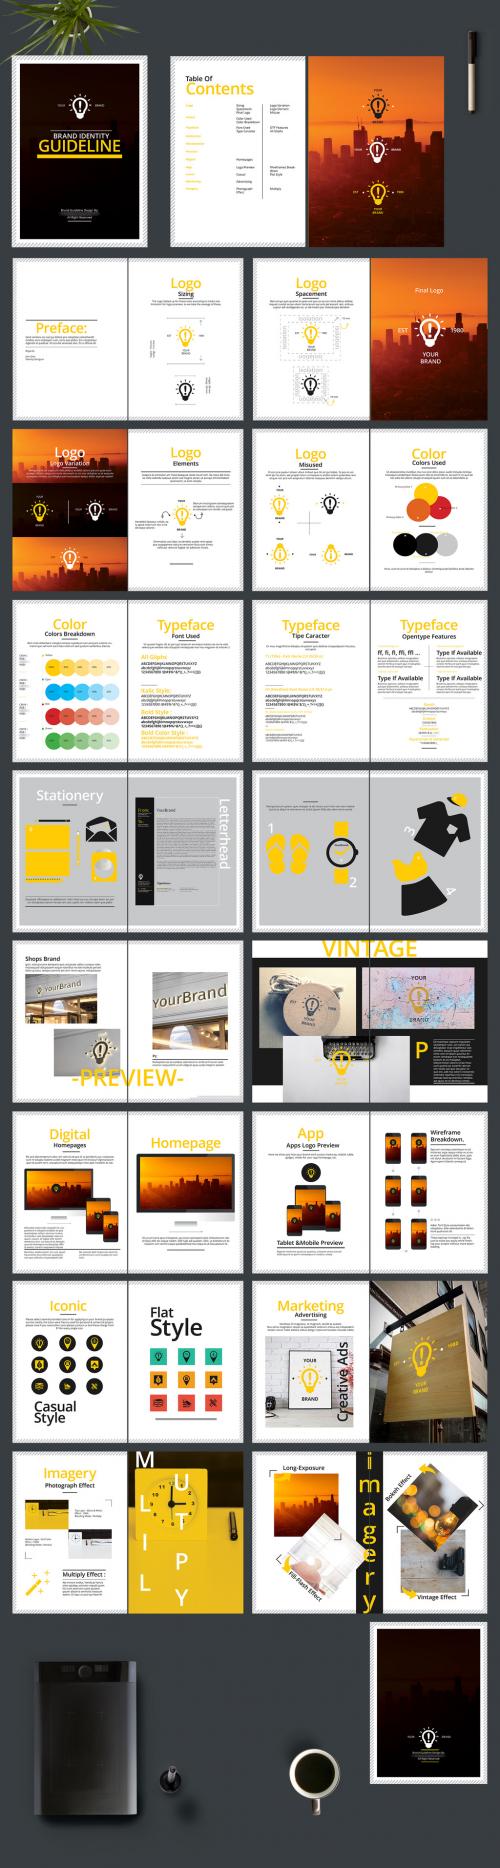 Adobe Stock - Brand Identity Report Layout with Yellow Accents - 210047603